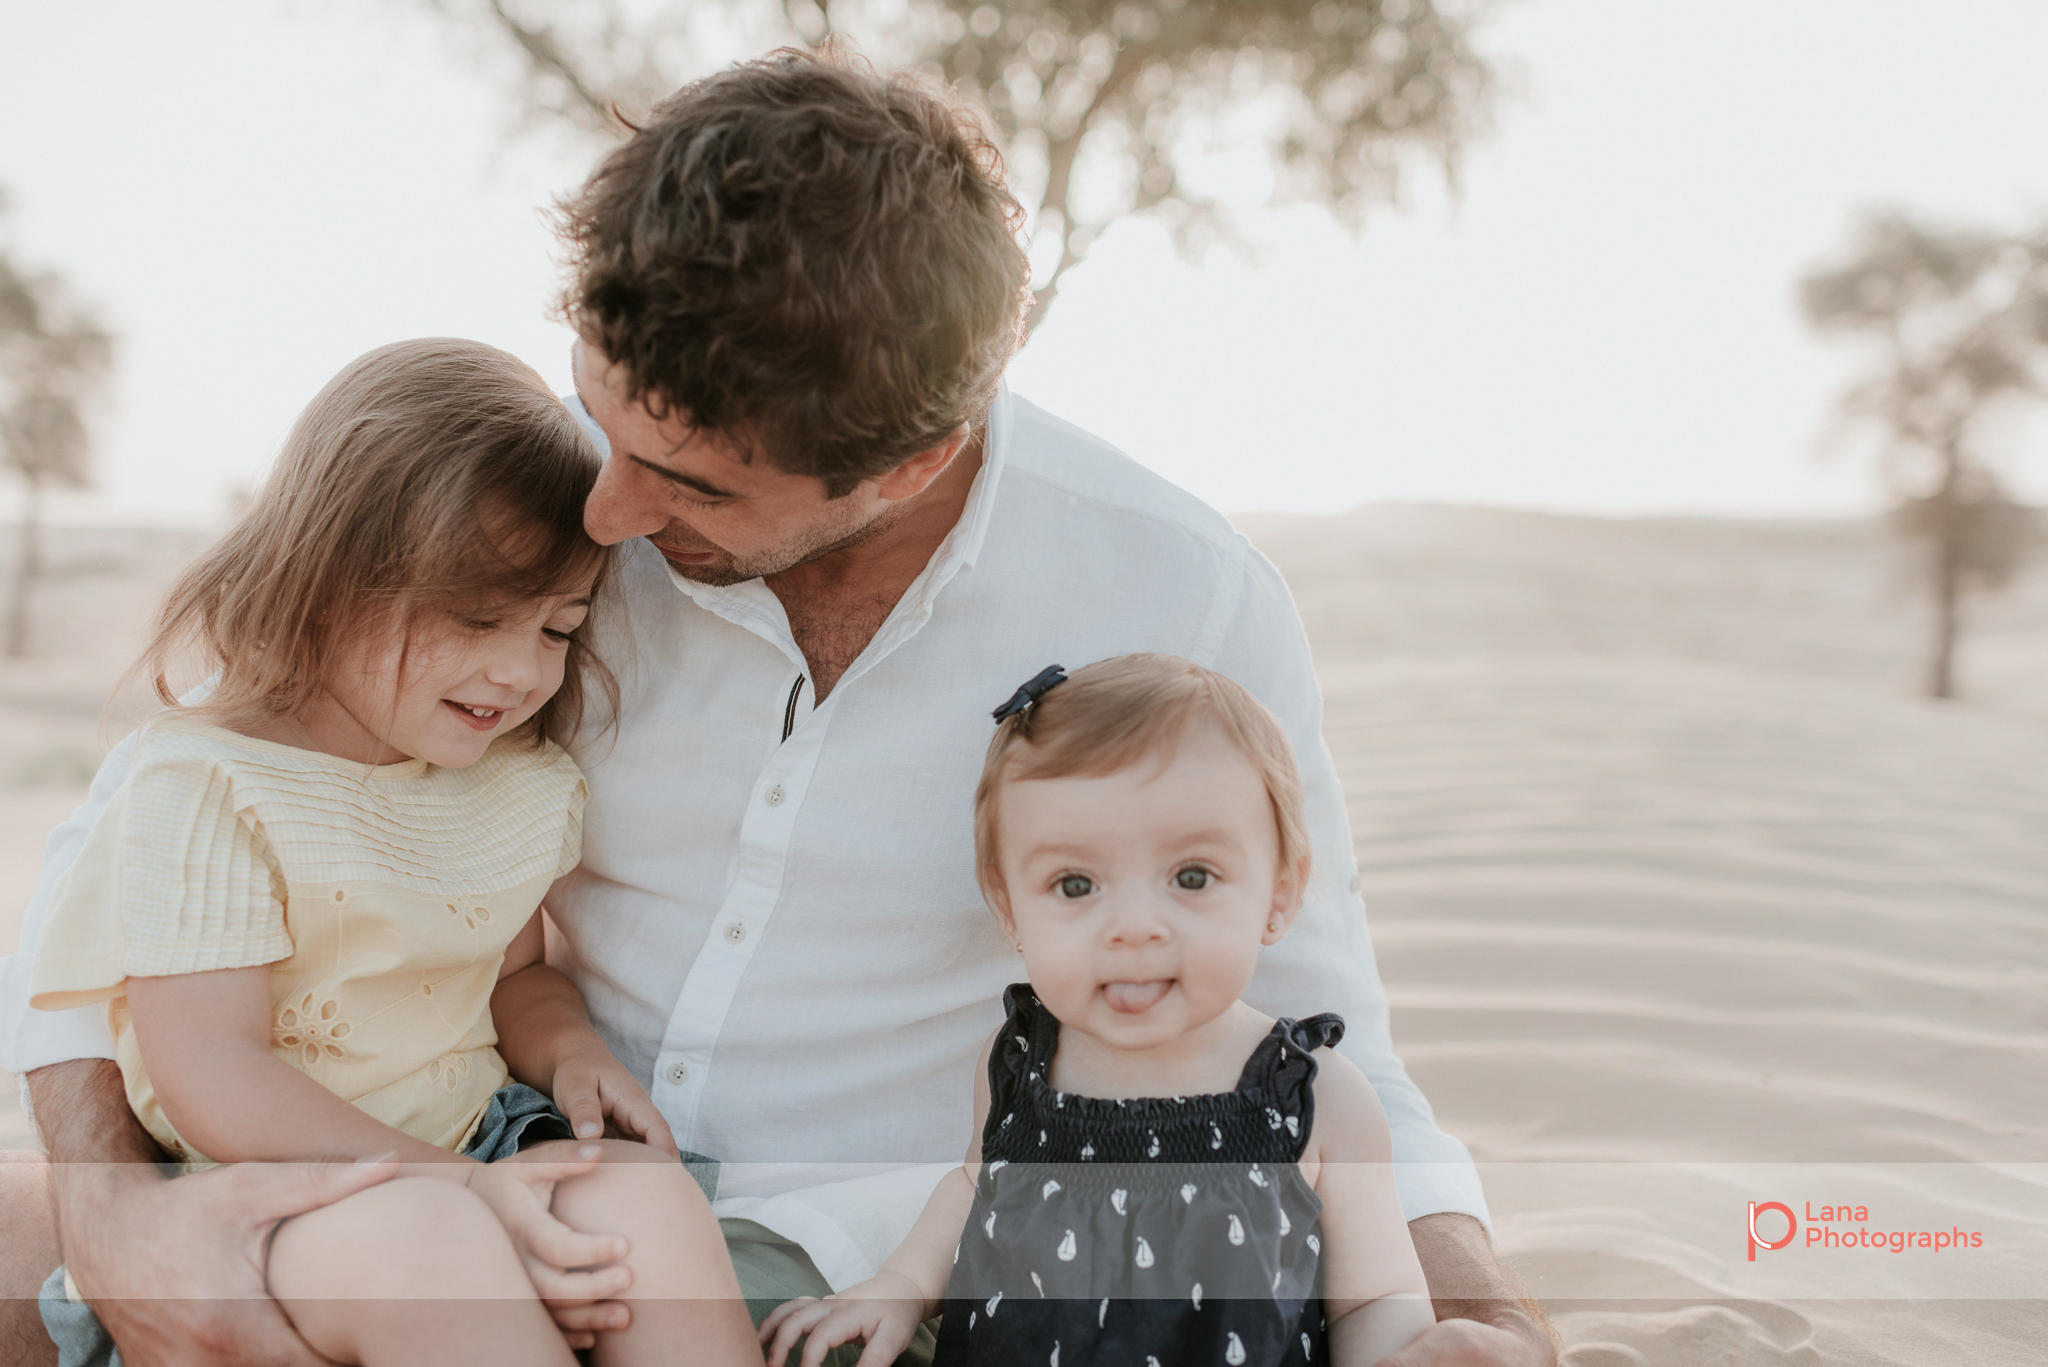  Lana Photographs Family Photographer Dubai Top Family Photographers father and his two daughters in the desert